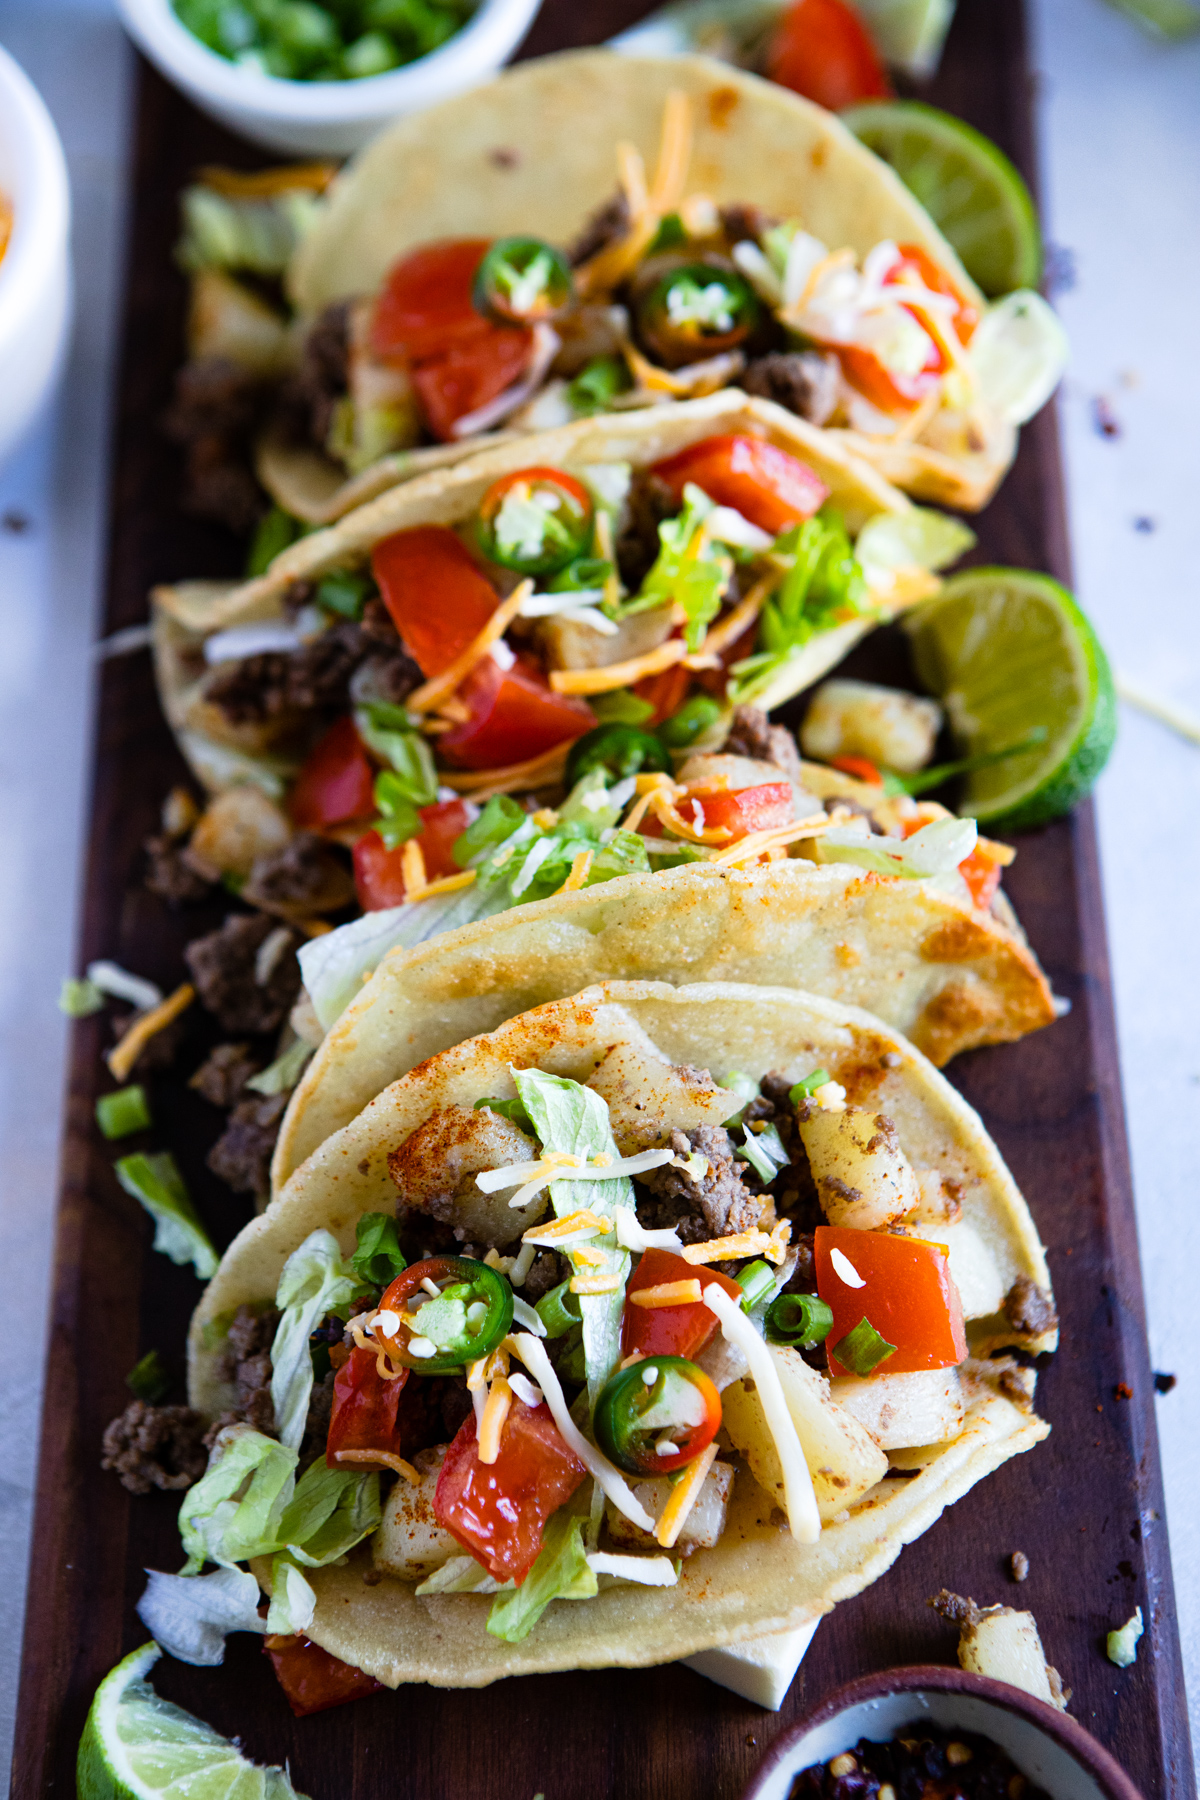 wooden board filled with crispy fried potato and beef tacos topped with garnishes